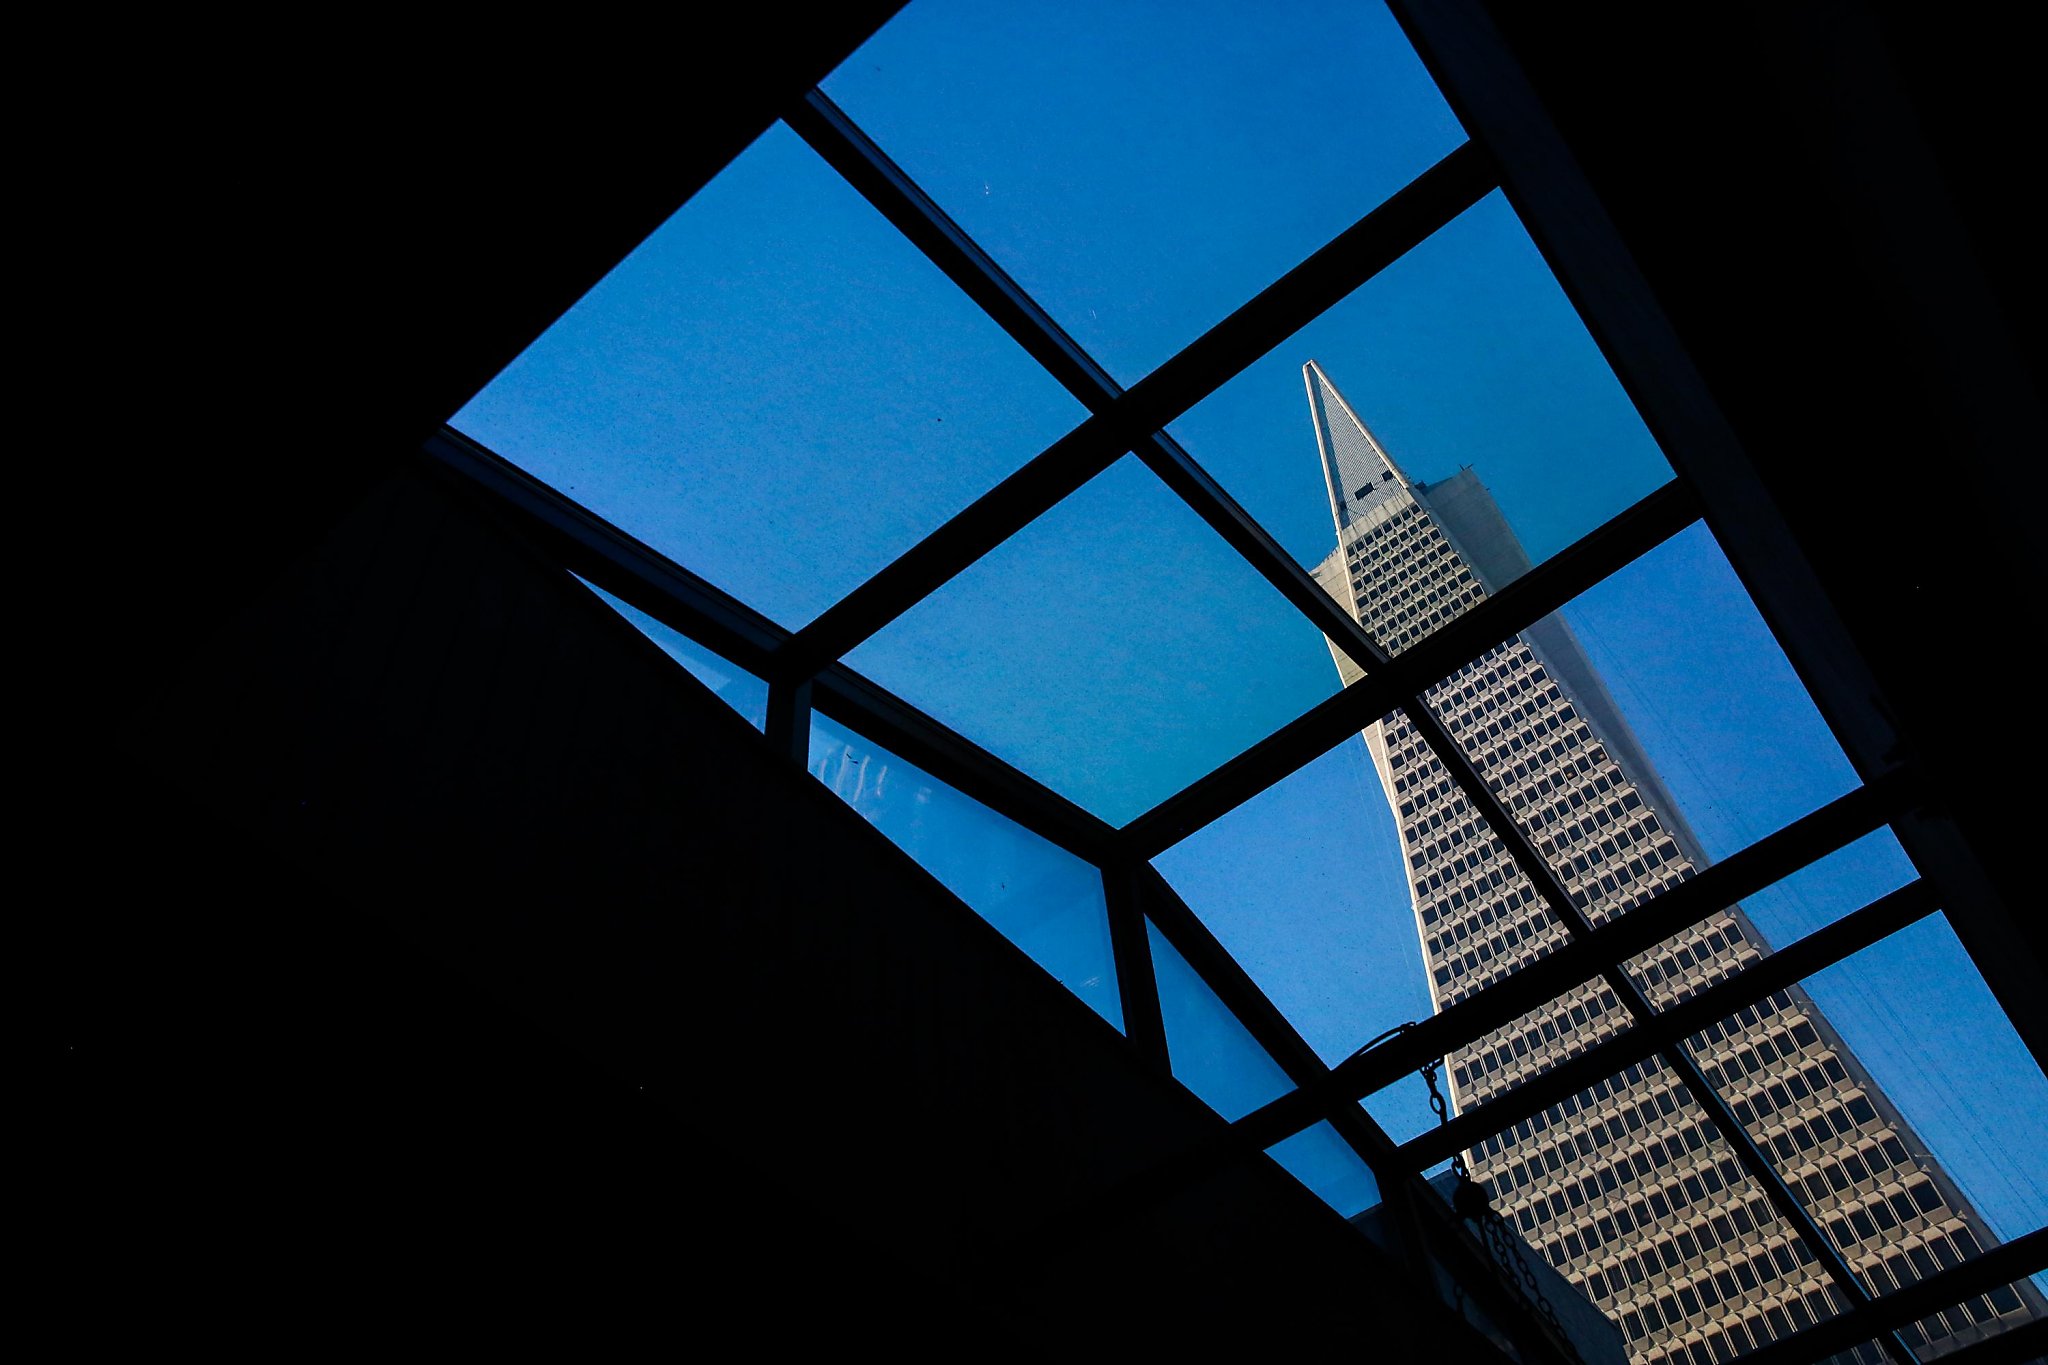 The new Salesforce Tower is the tallest building in San Francisco, but it's  not much taller than the Eiffel Tower